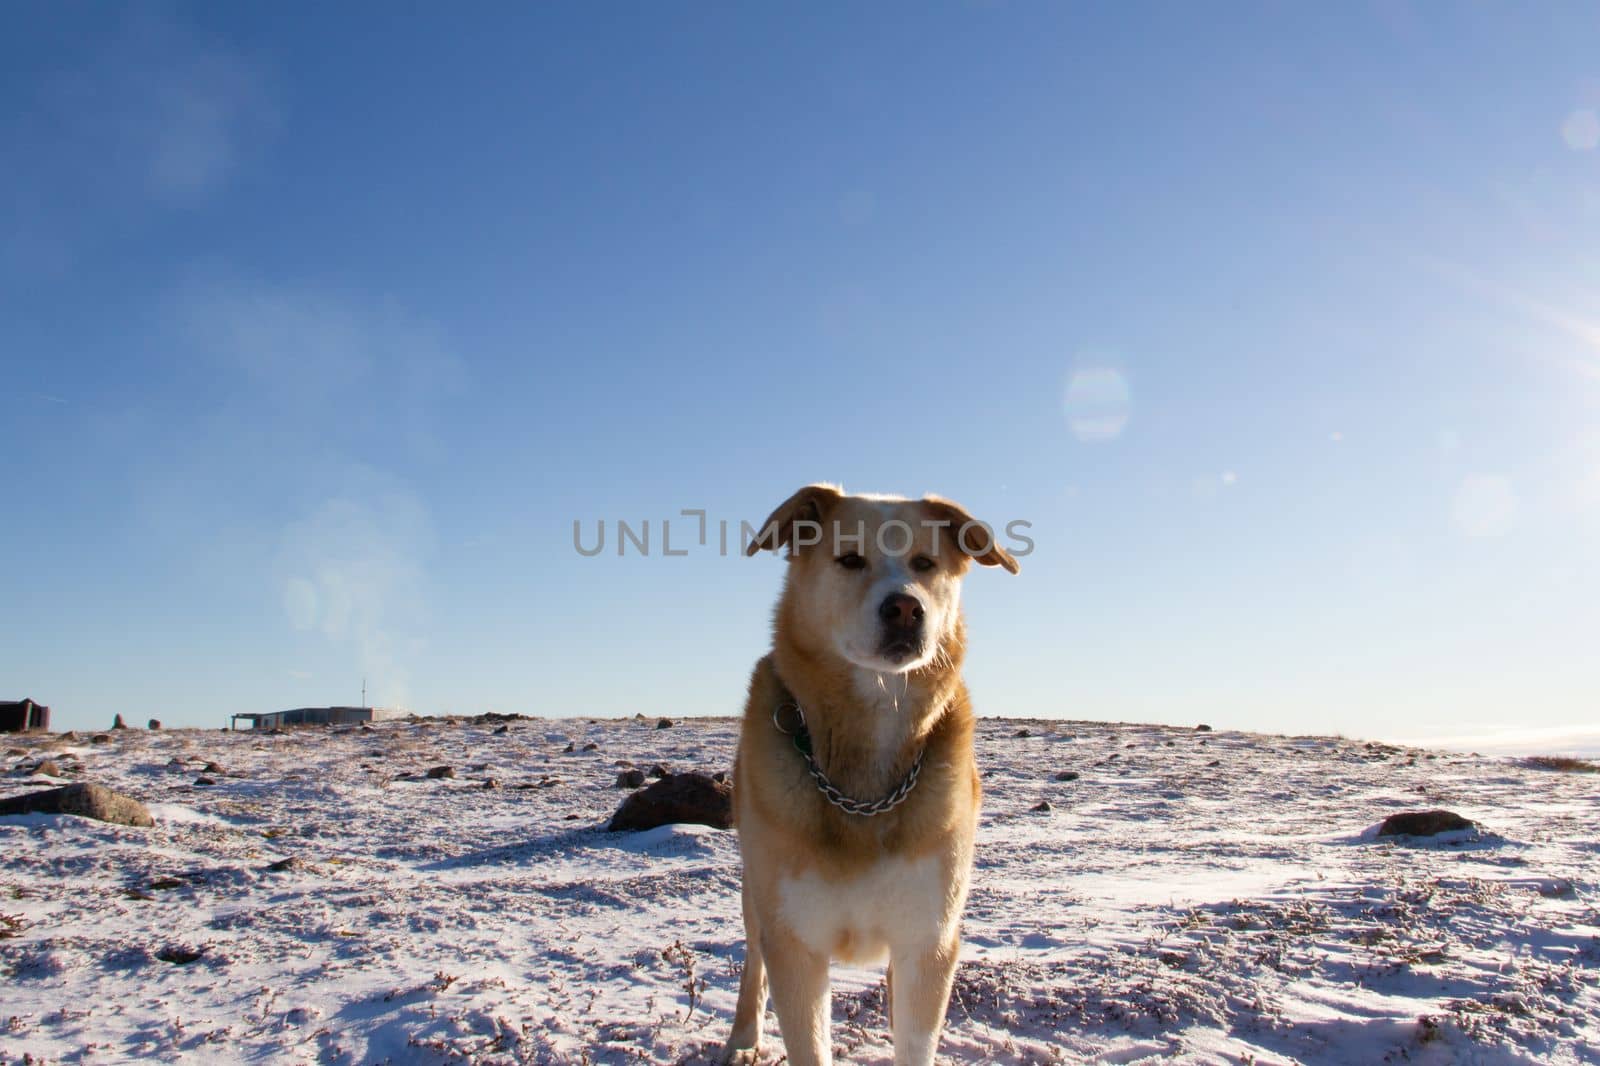 A yellow Labrador dog standing on snow in a cold arctic landscape by Granchinho